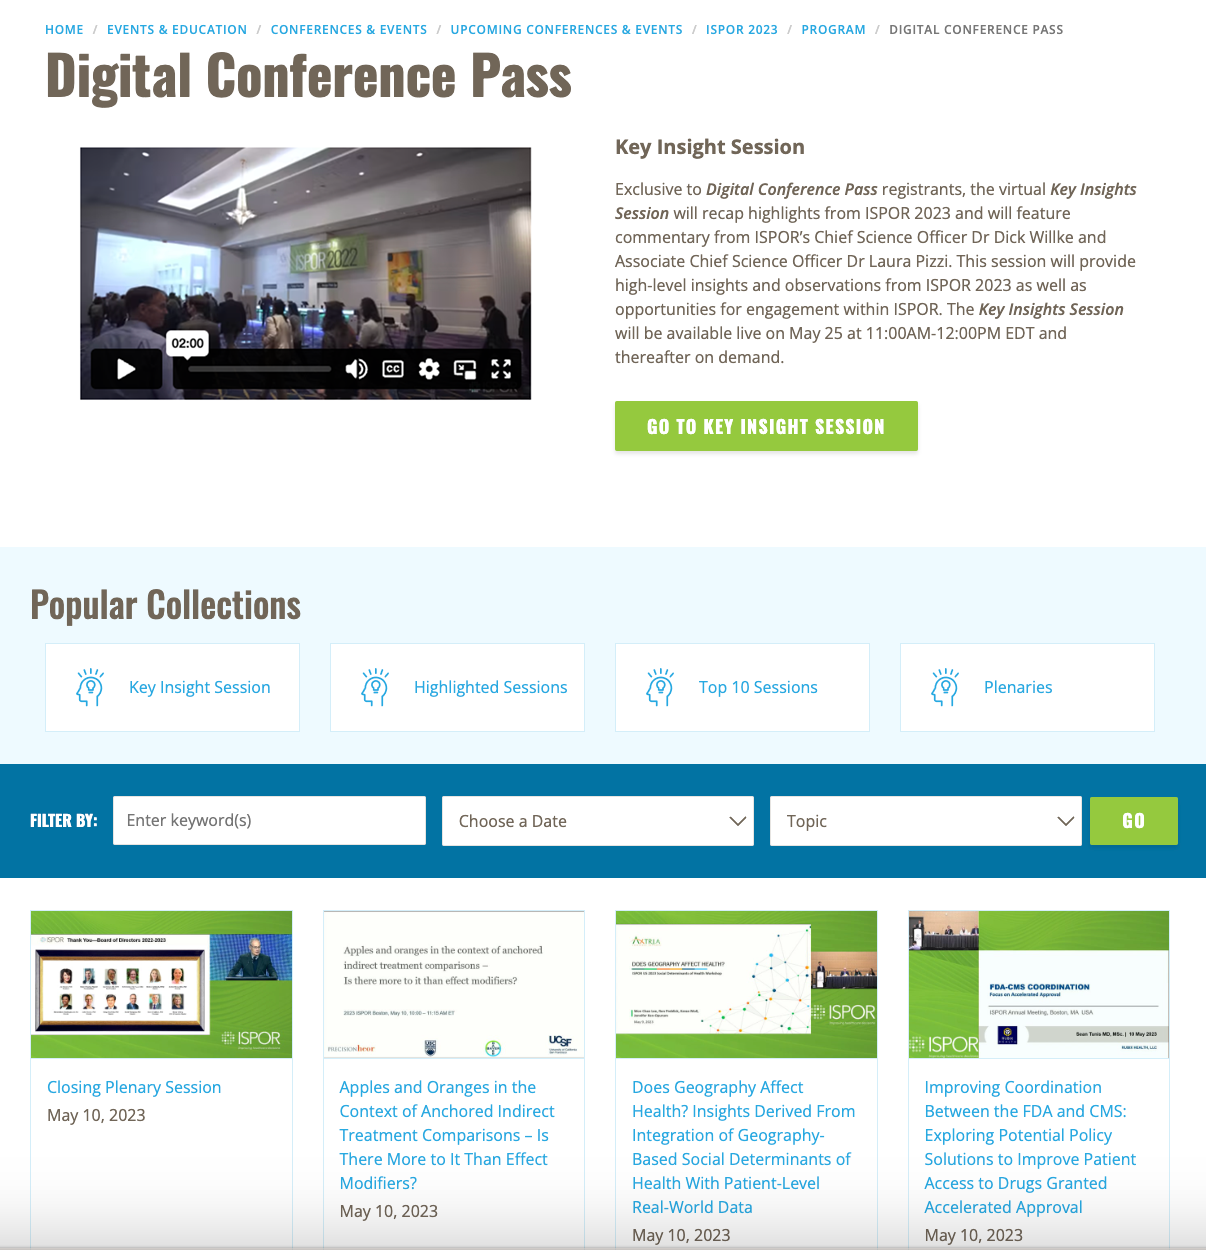 Digital Conference Pass Home Image